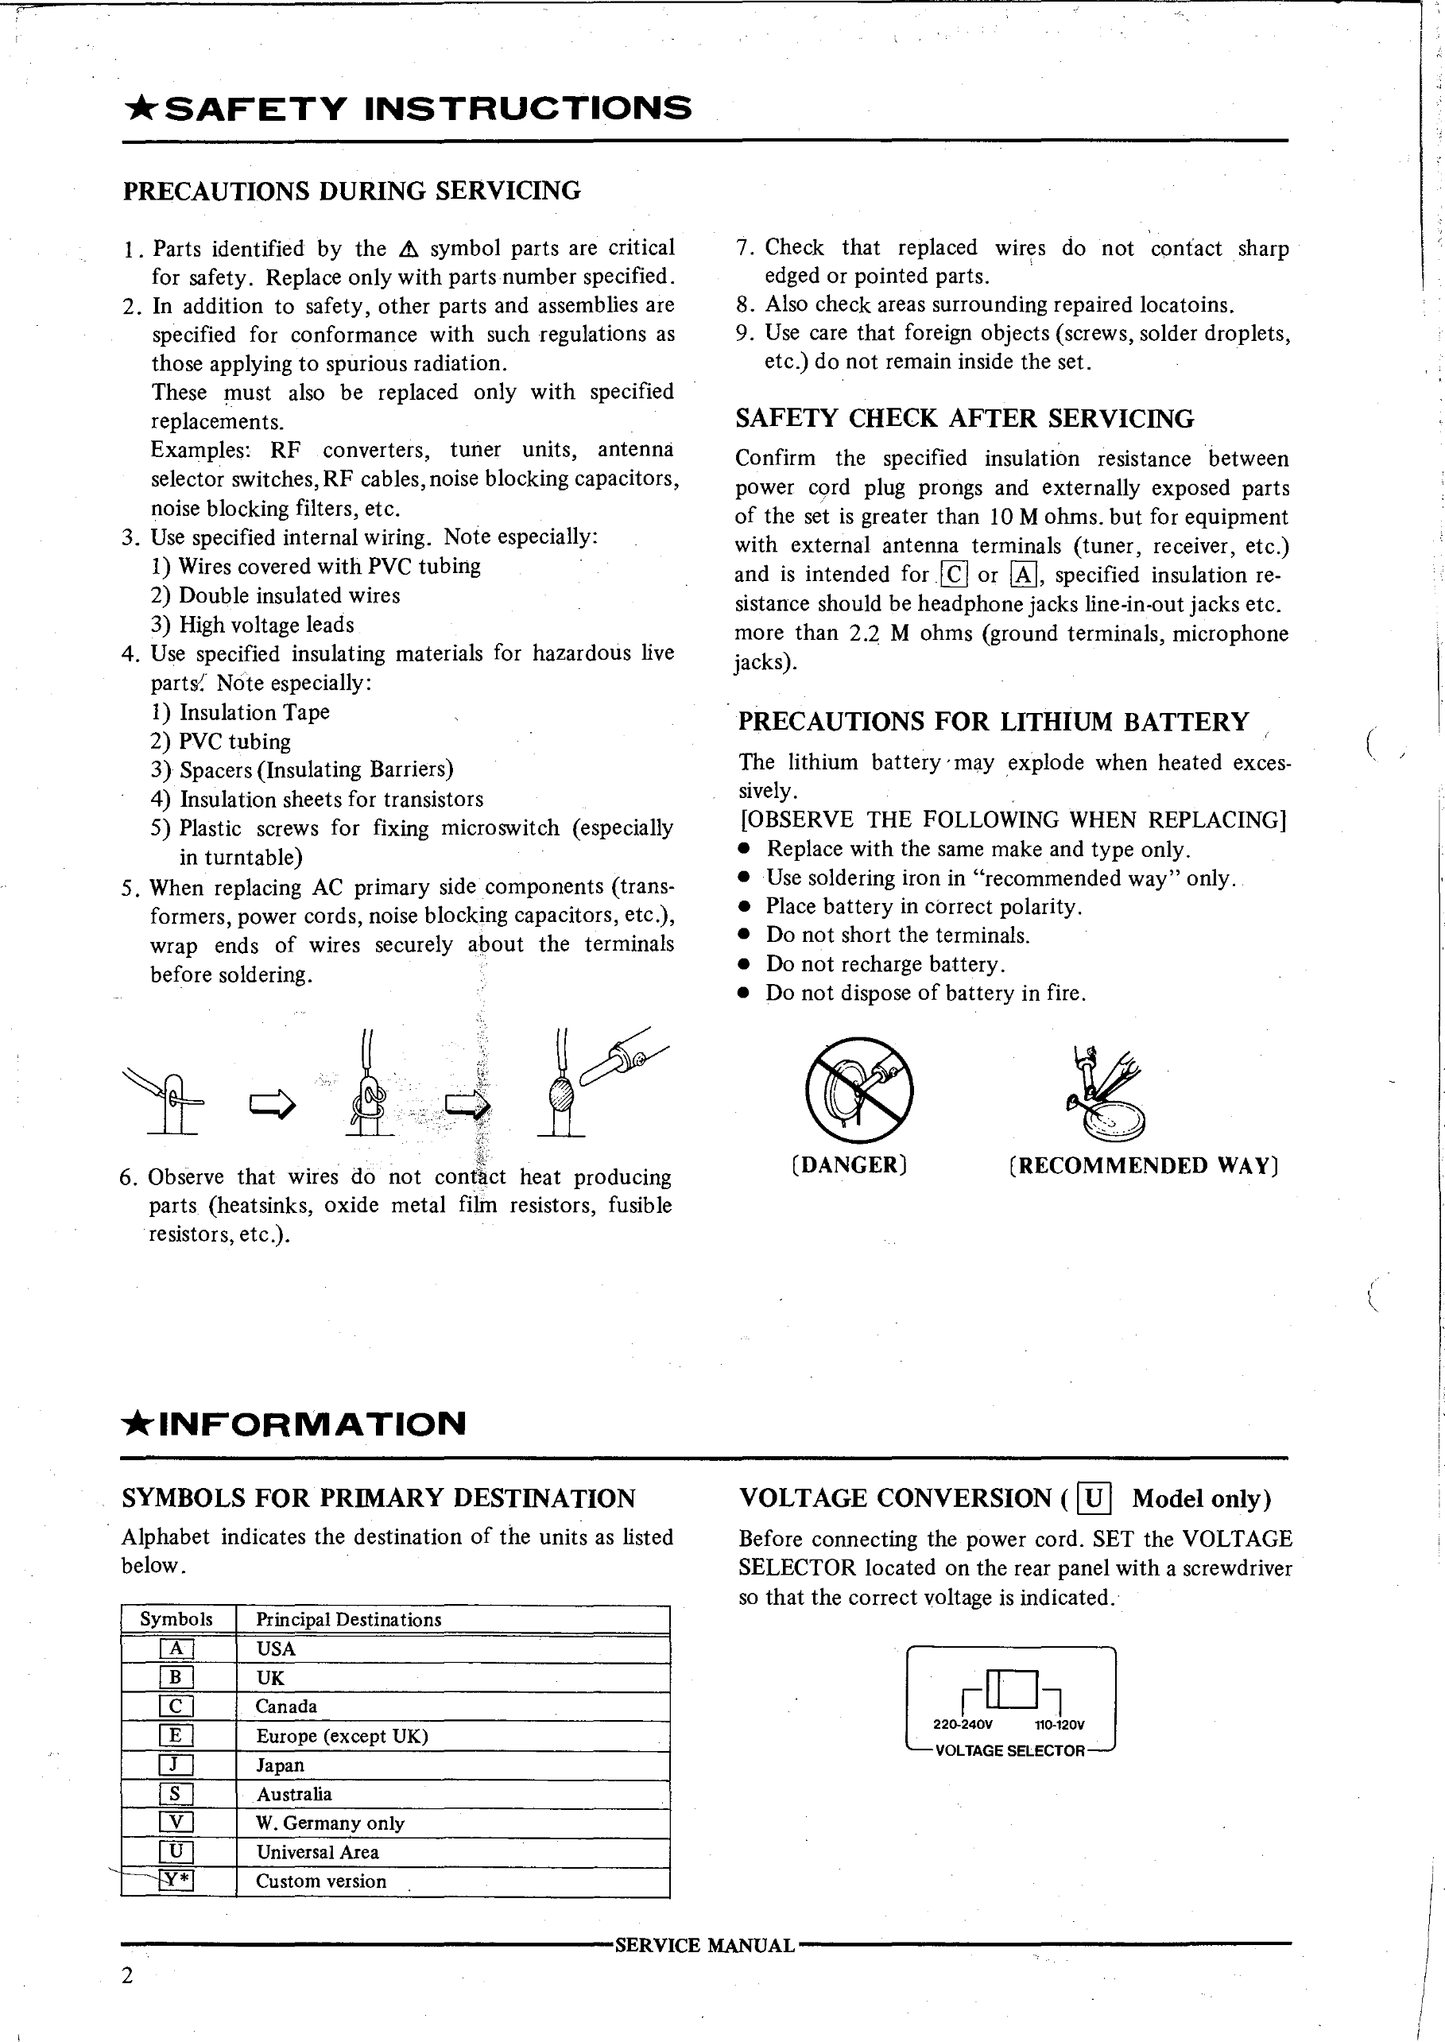 Akai AT-93 Quartz Synthesizer Tuner Service Manual (Pages: 29)